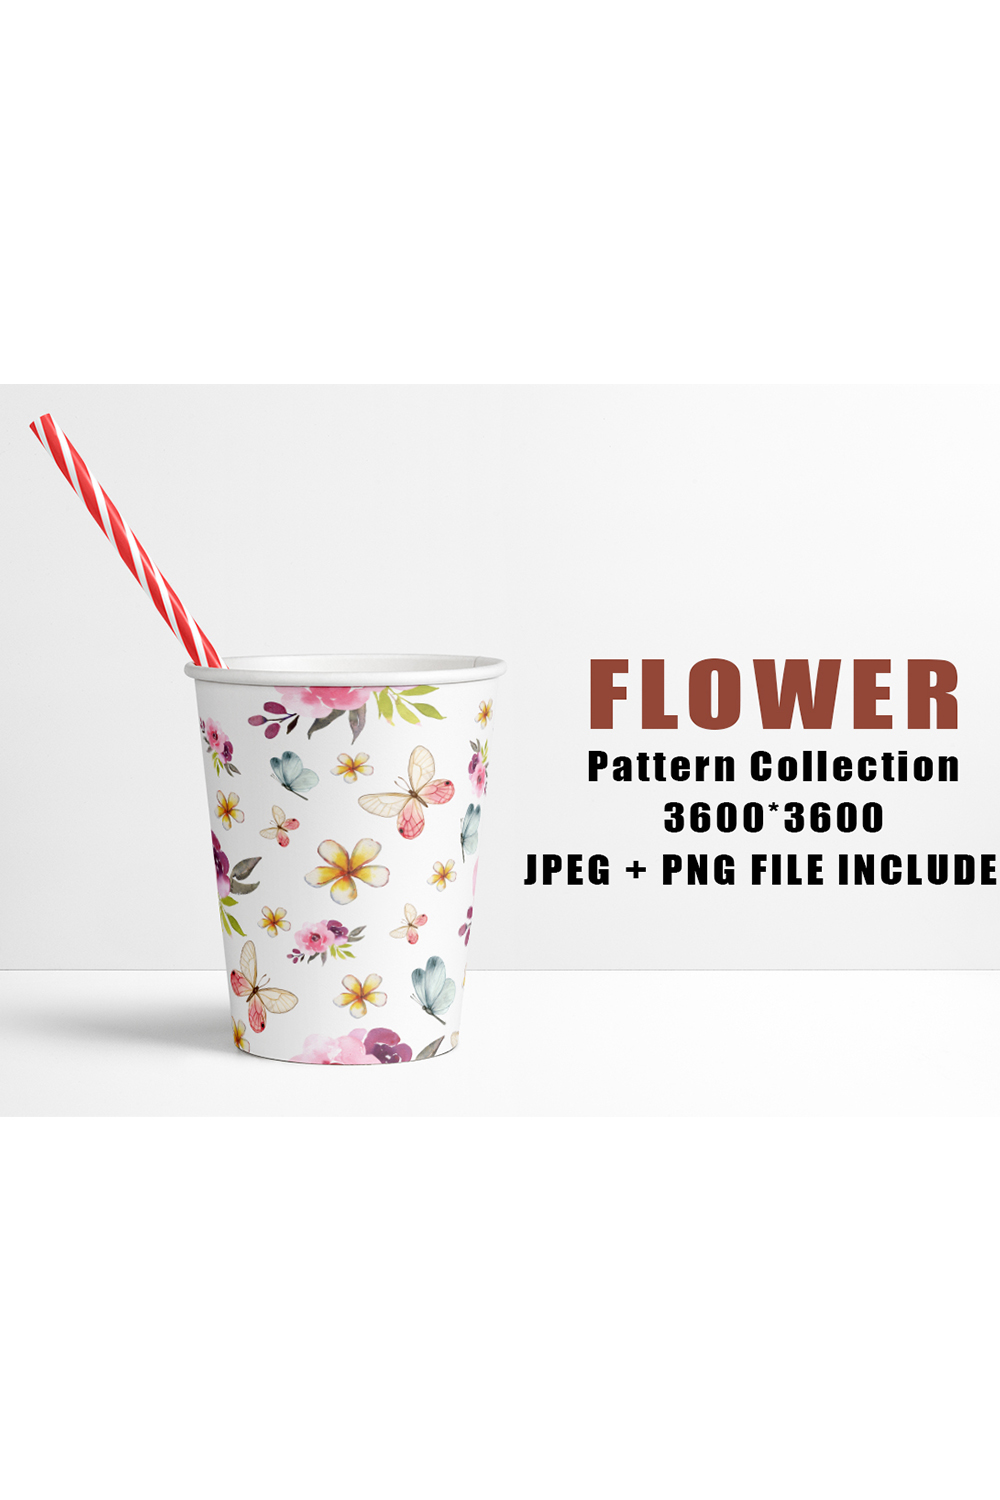 Image of a paper cup with beautiful patterns of flowers